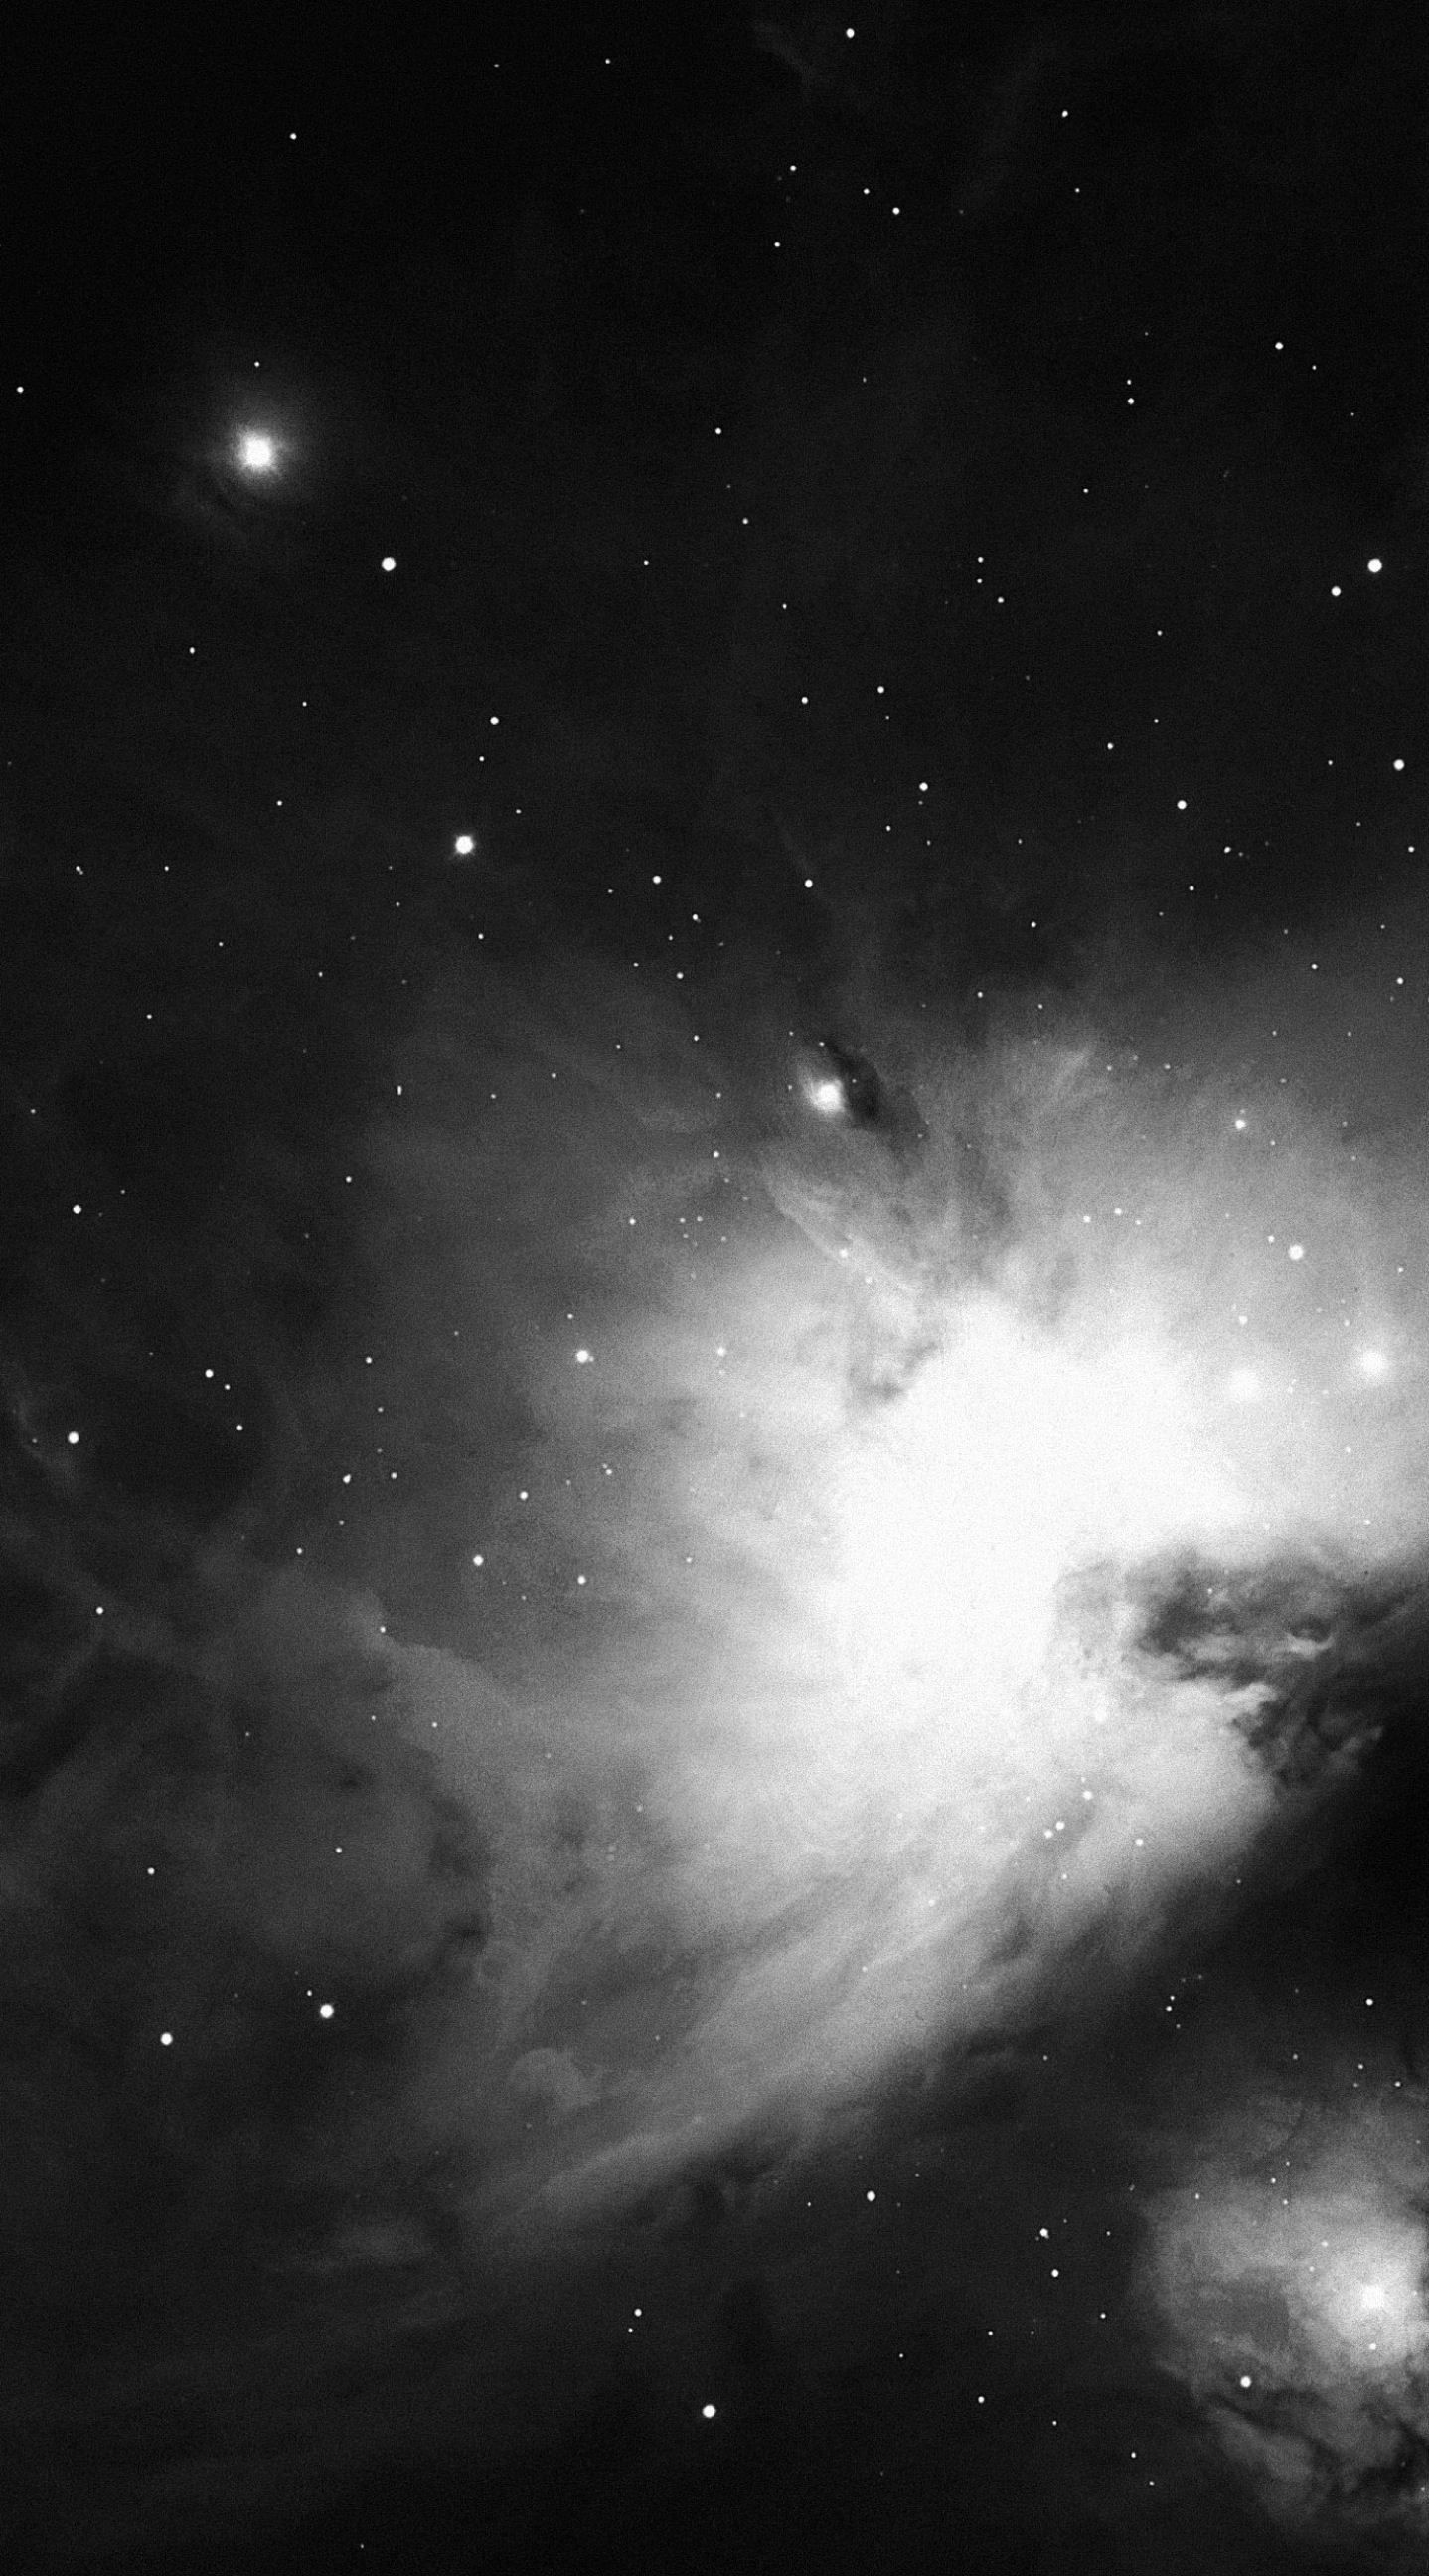 Black And White Galaxy Wallpapers